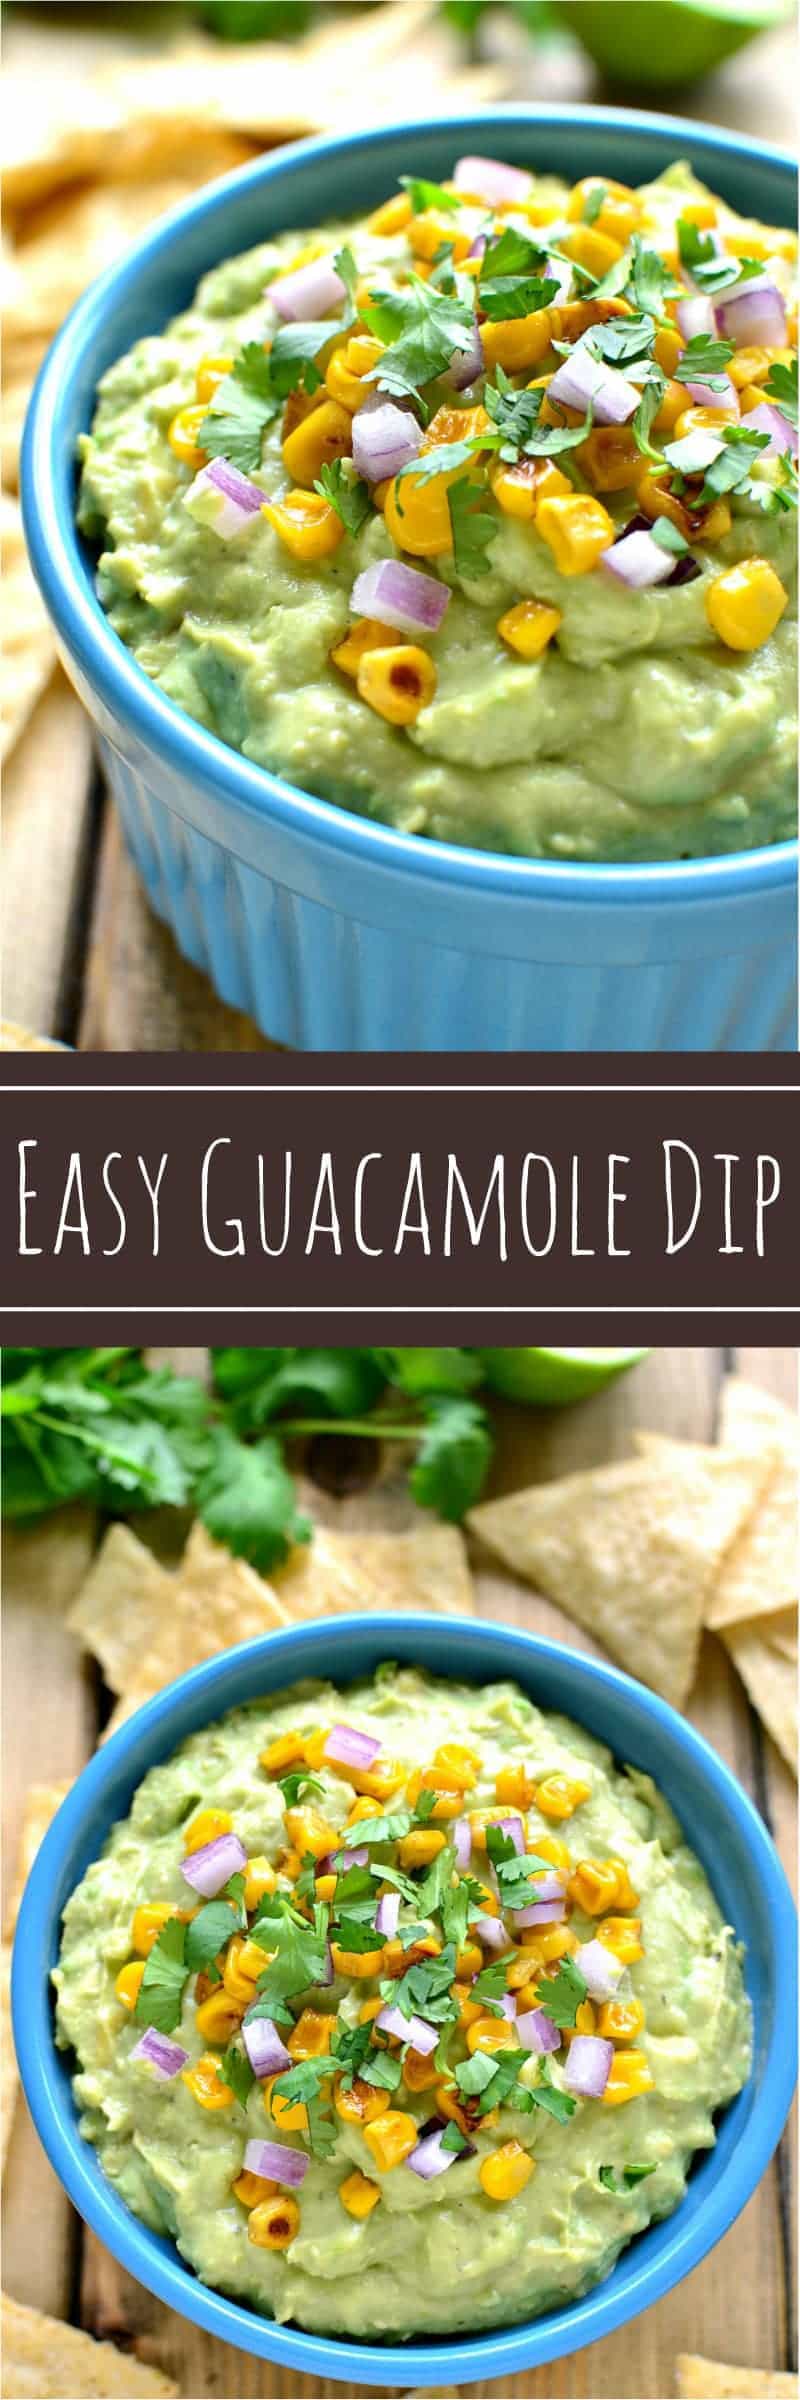 This Easy Guacamole Dip comes together two ingredients! Add your favorite garnishes to jazz it up, or serve it as is. Either way, it's guaranteed to become a quick & easy crowd favorite!